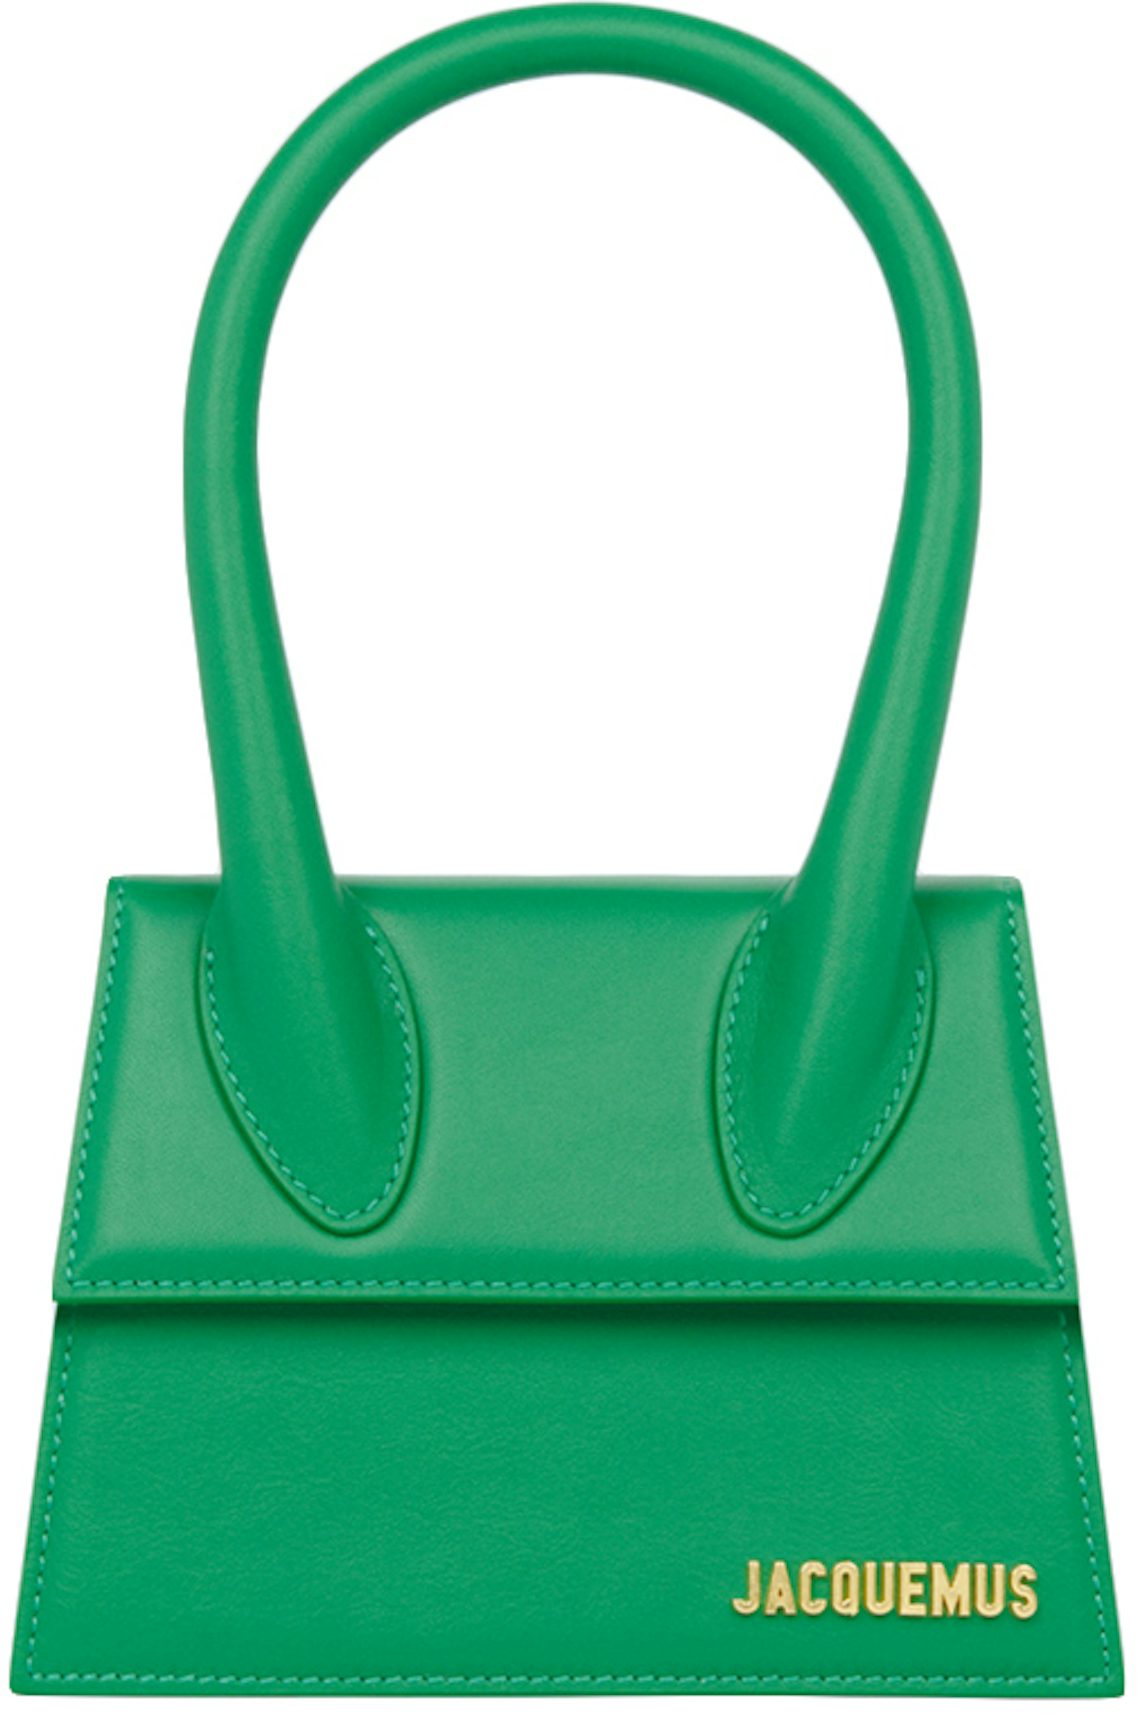 Jacquemus - Authenticated Chiquito Handbag - Leather Green for Women, Never Worn